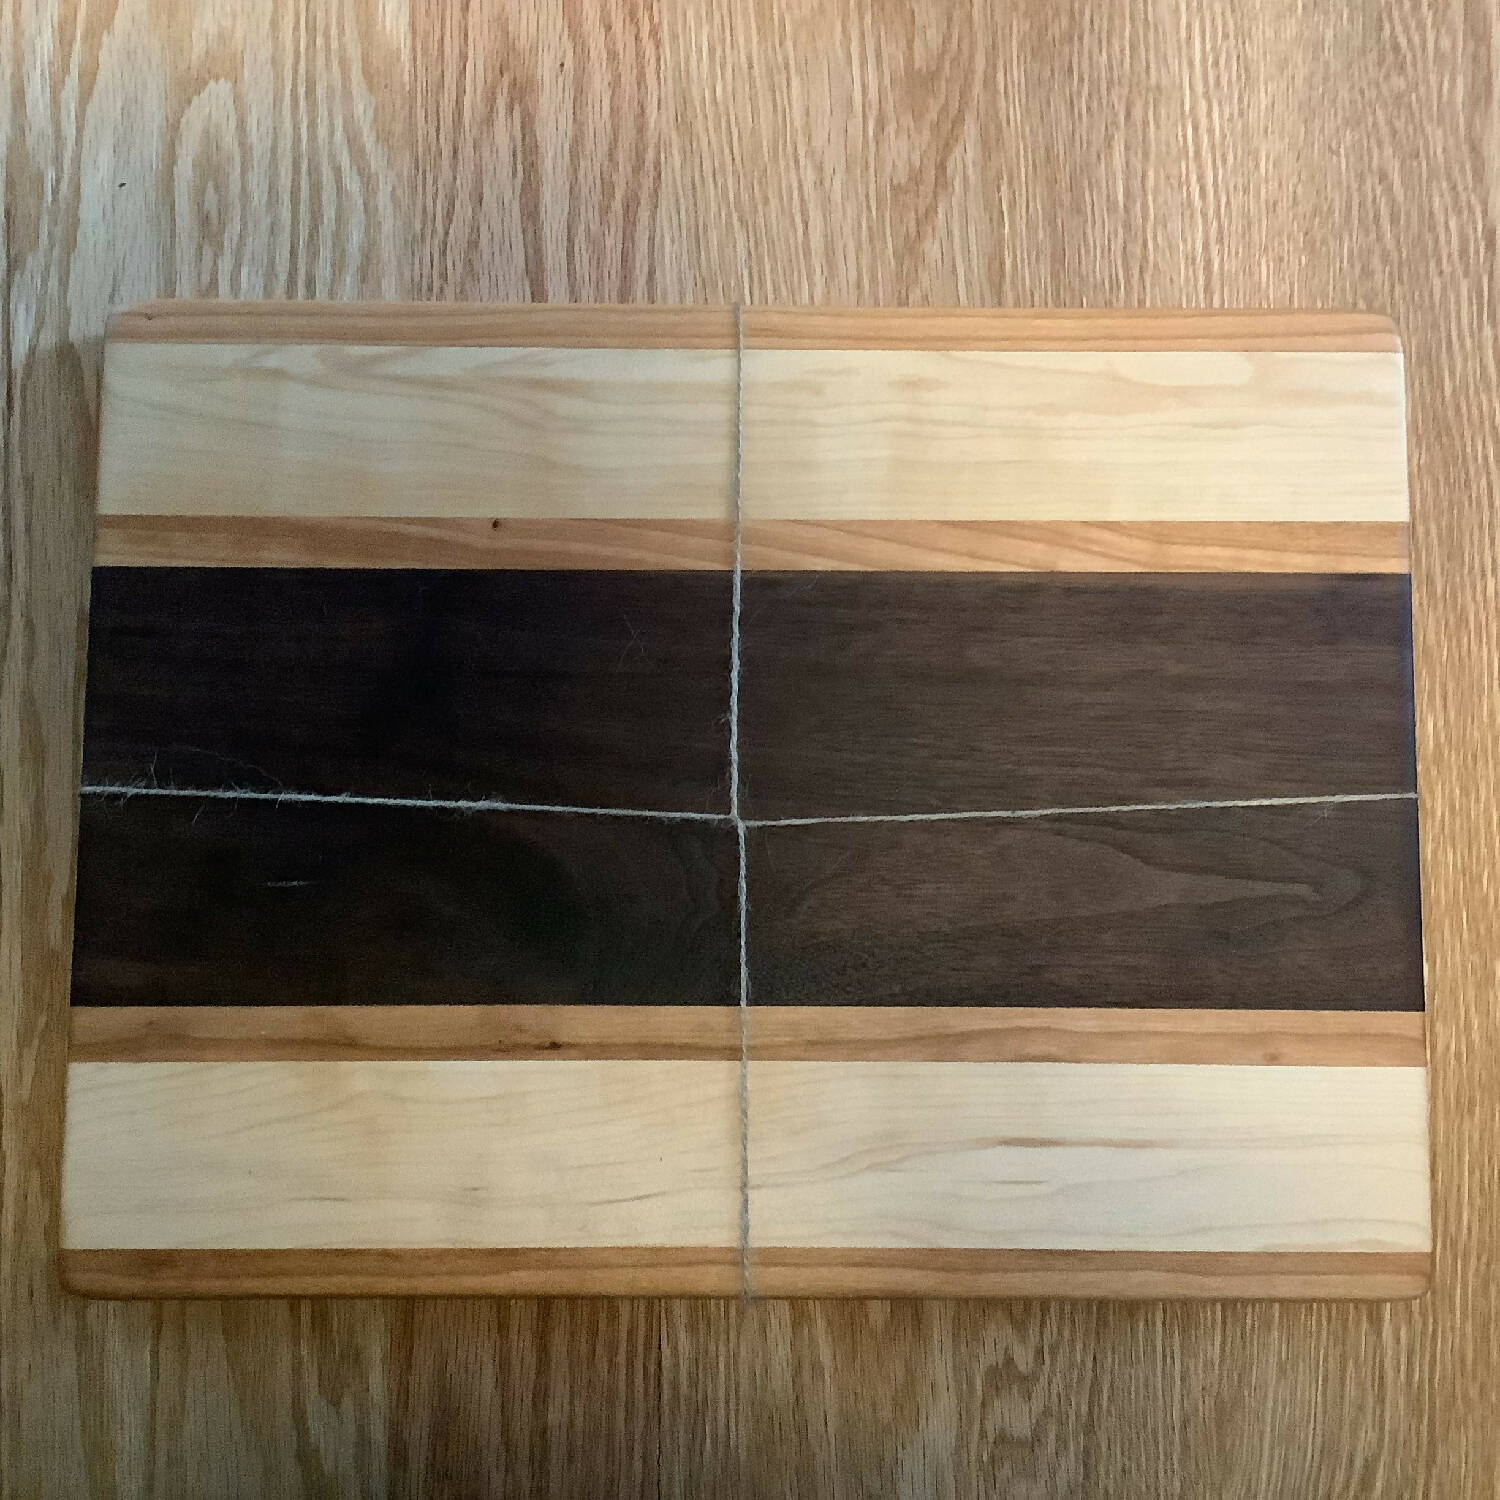 12” x 16” cutting board, walnut with cherry and maple stripes